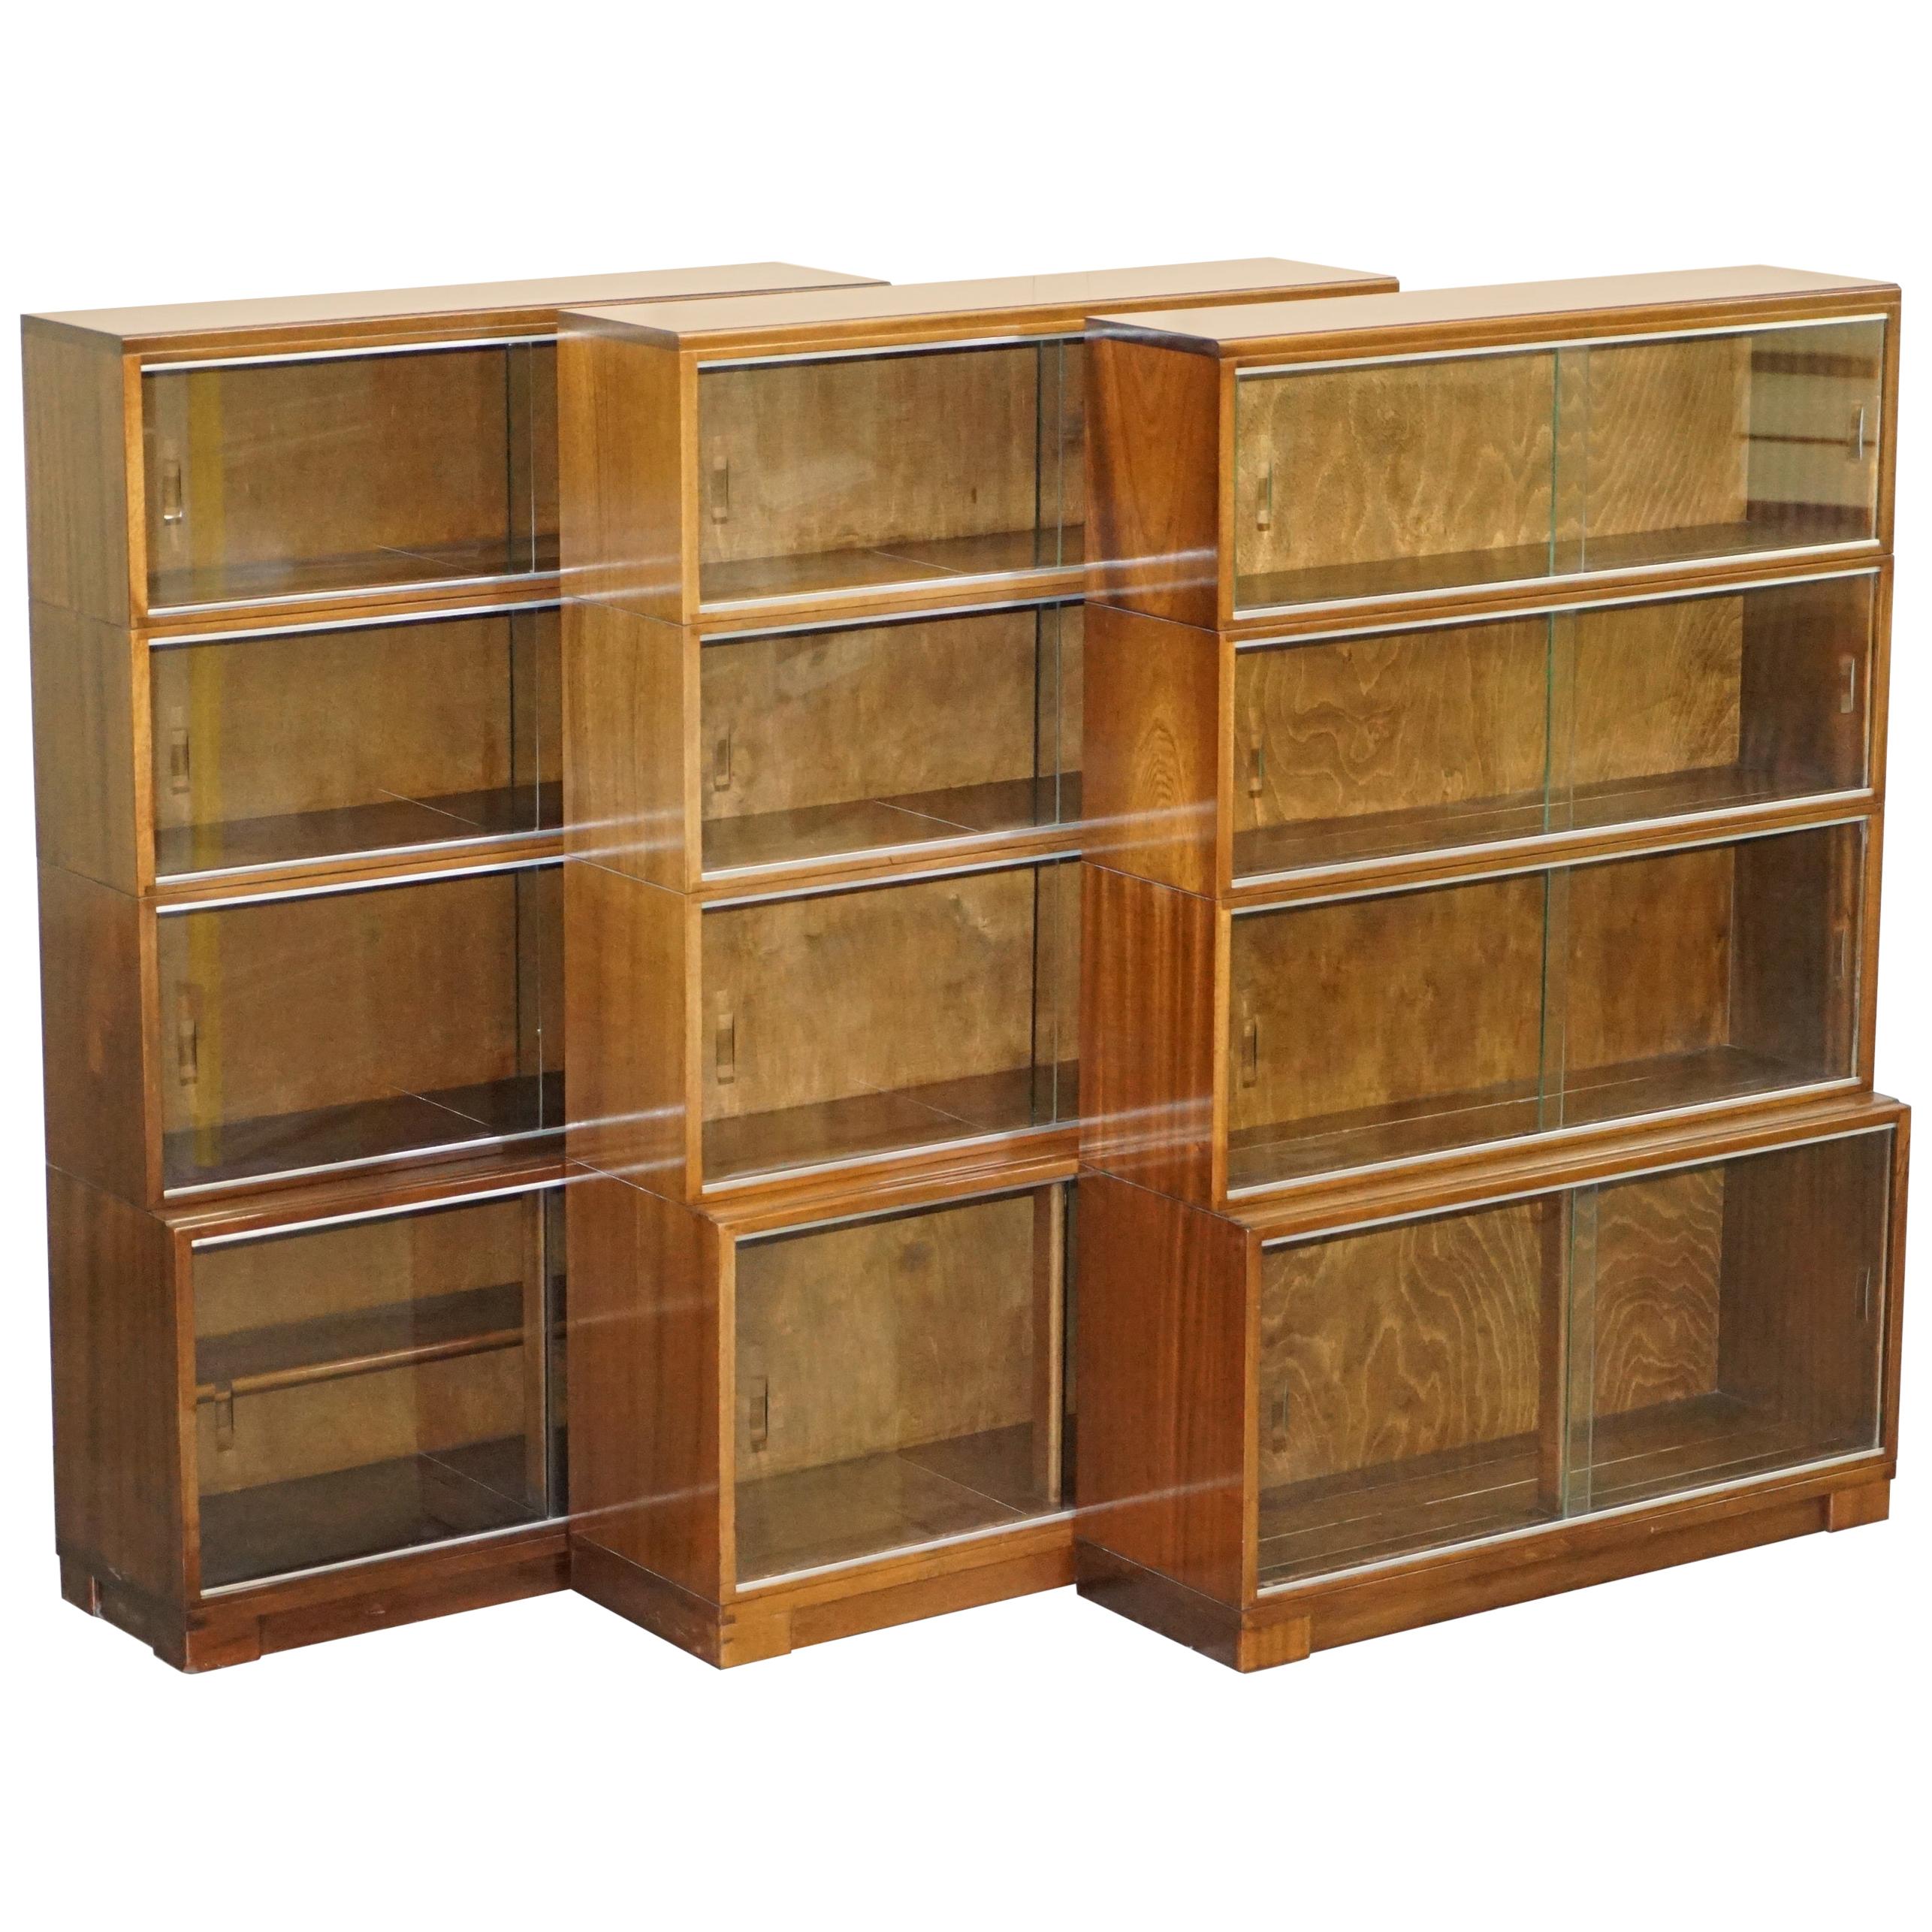 Lovely Suite of Three Minty Oxford Modualr Stacking Bookcases Hardwood Frames